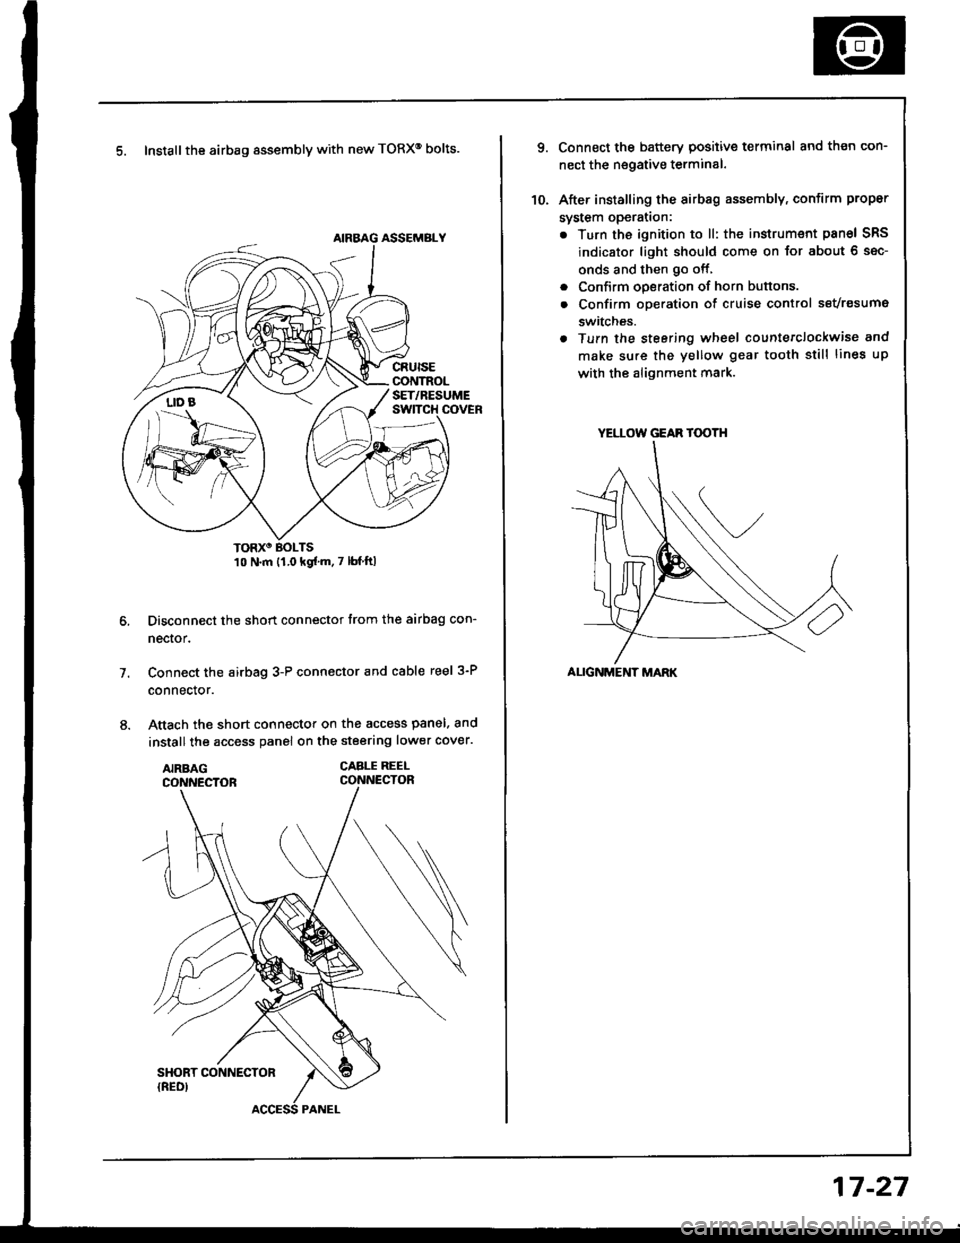 HONDA INTEGRA 1994 4.G Owners Guide 5. Install the airbag assembly with new TORXo bolts.
TORXO BOLTS10 N.m {1.0 kgfm.7 lbf ftl
Disconnect the short connector trom the airbag con-
nector.
Connect the airbag 3-P connector and cable reel 